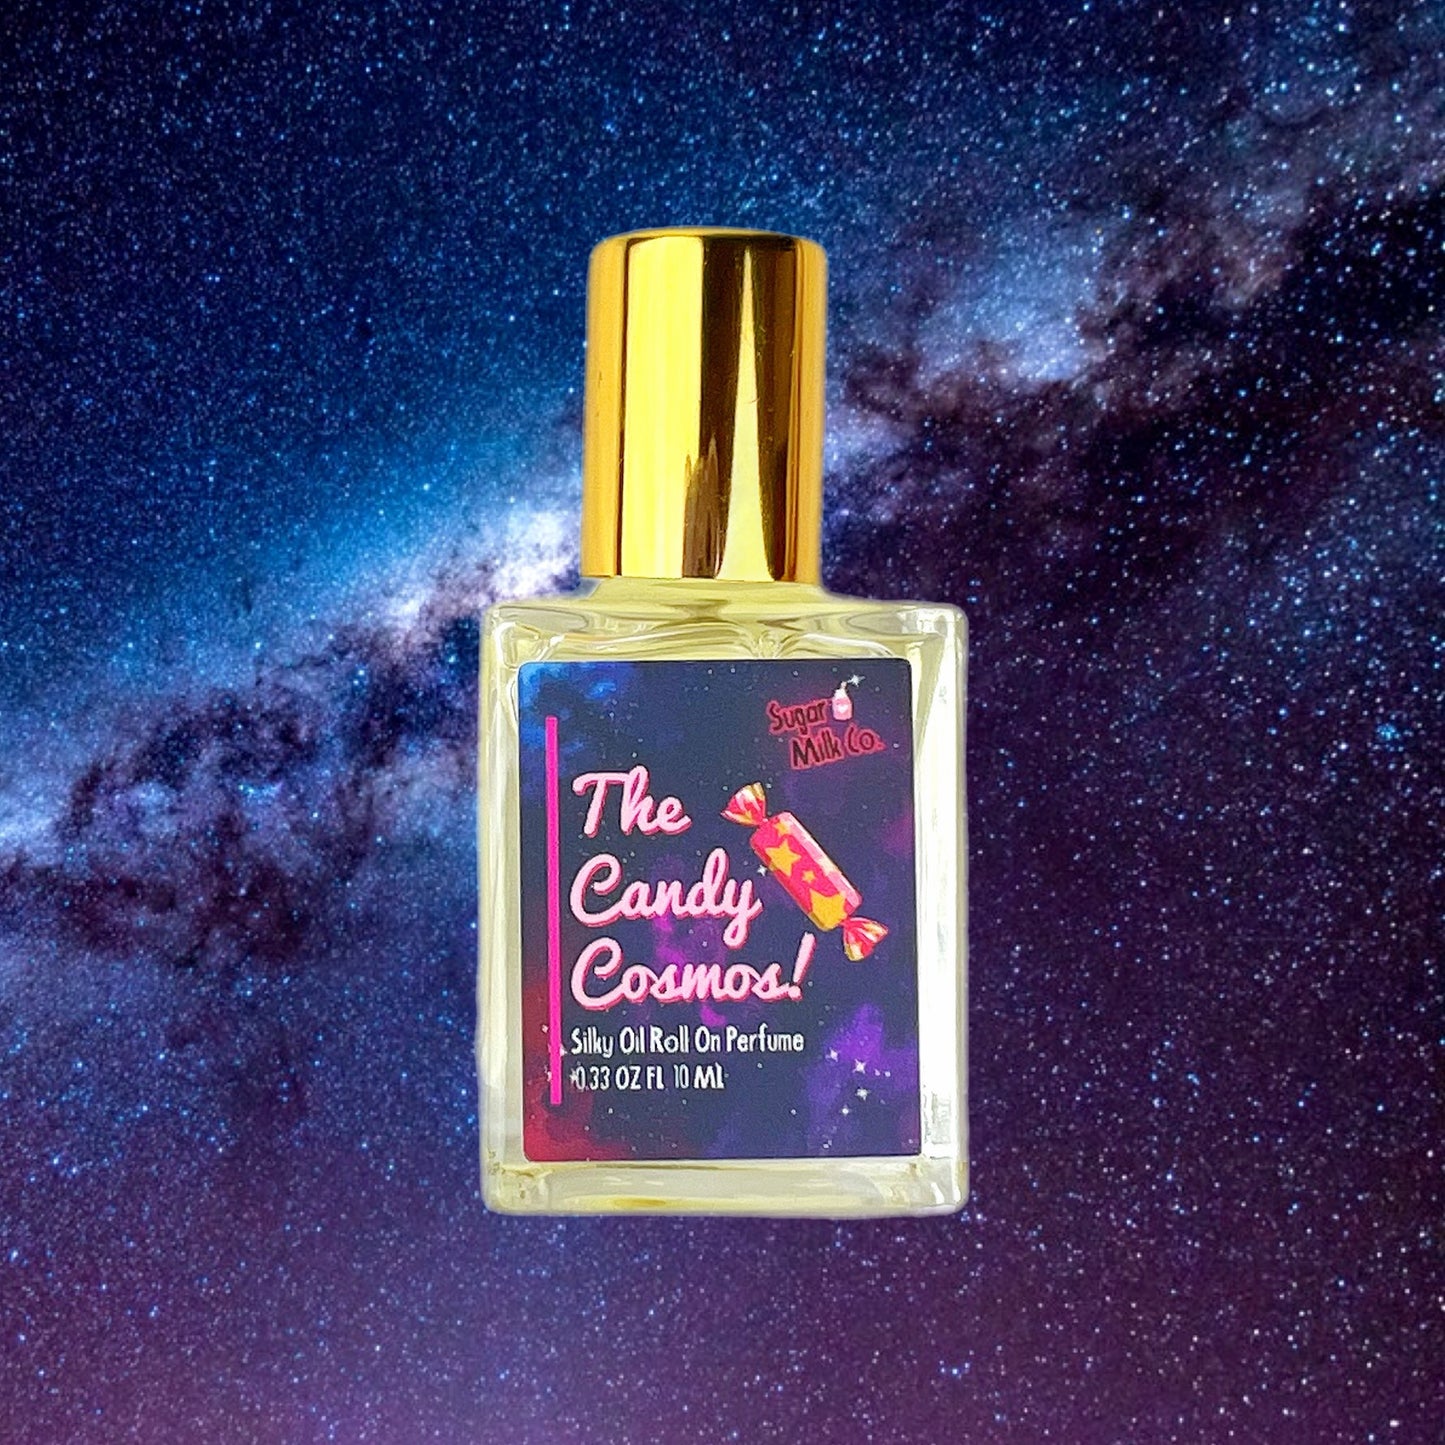 The Candy Cosmos Perfume Oil